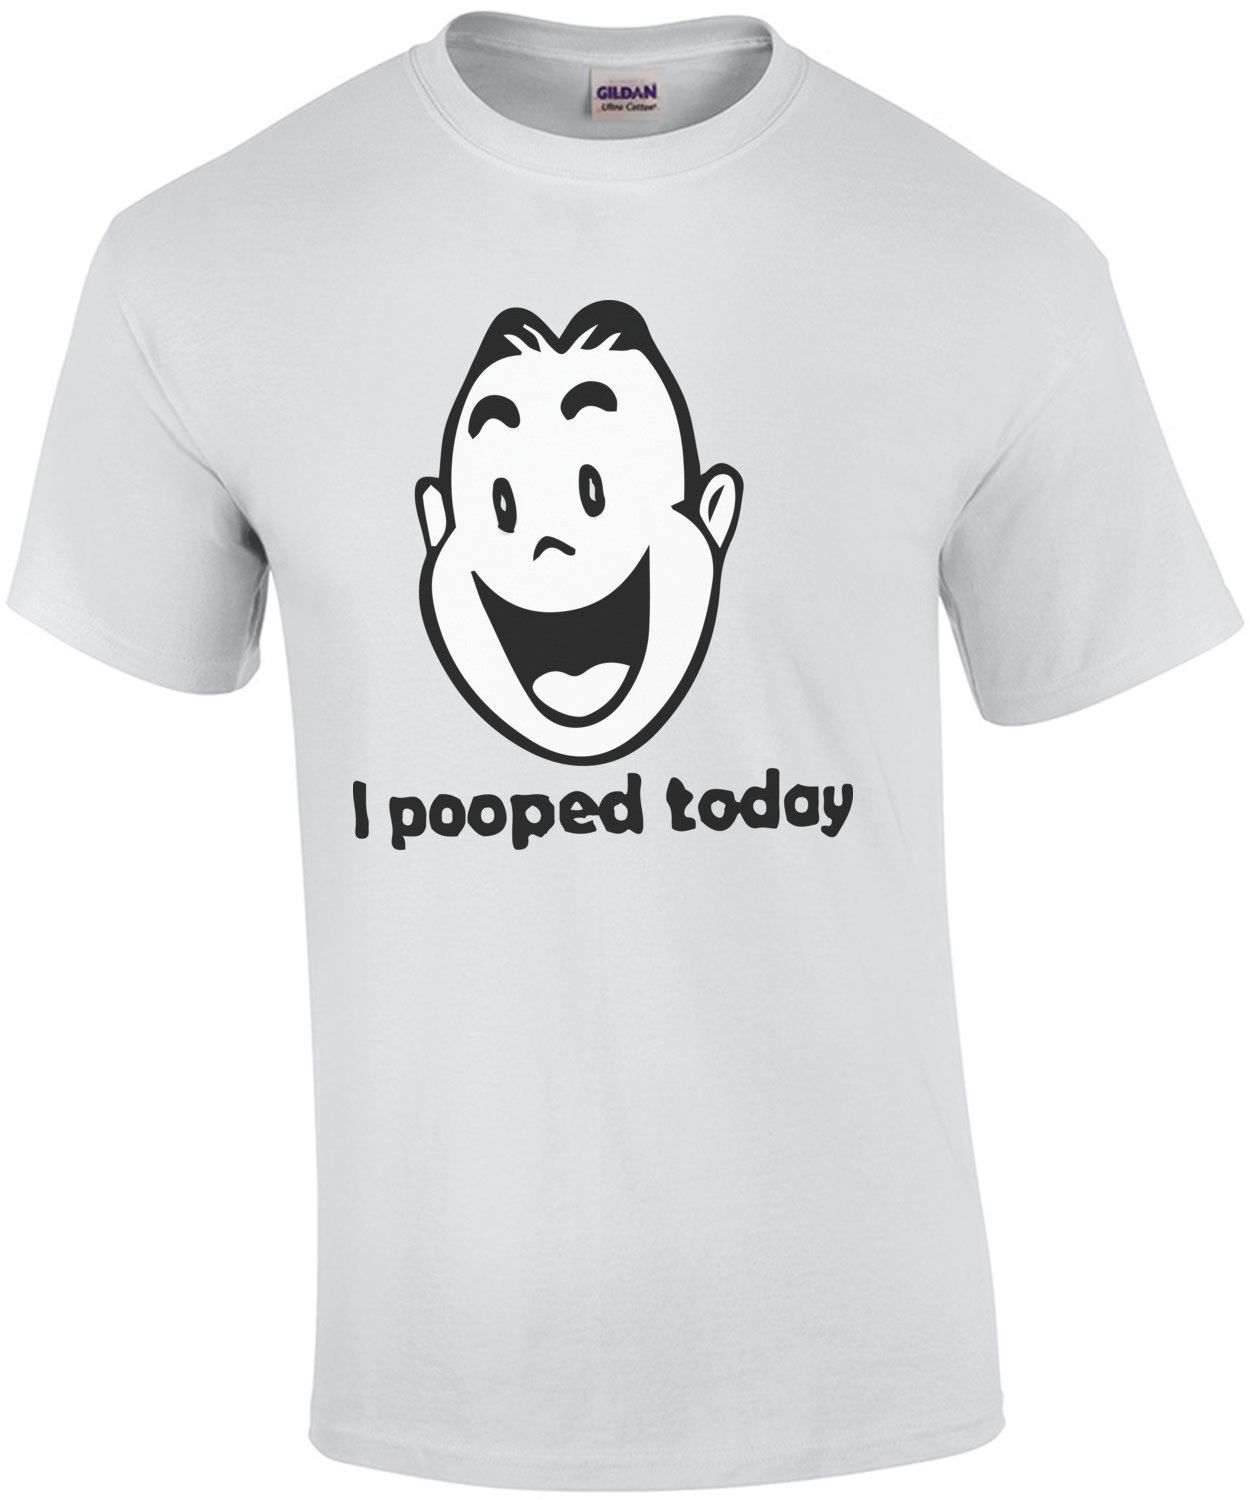 I Pooped Today - Funny T-Shirt